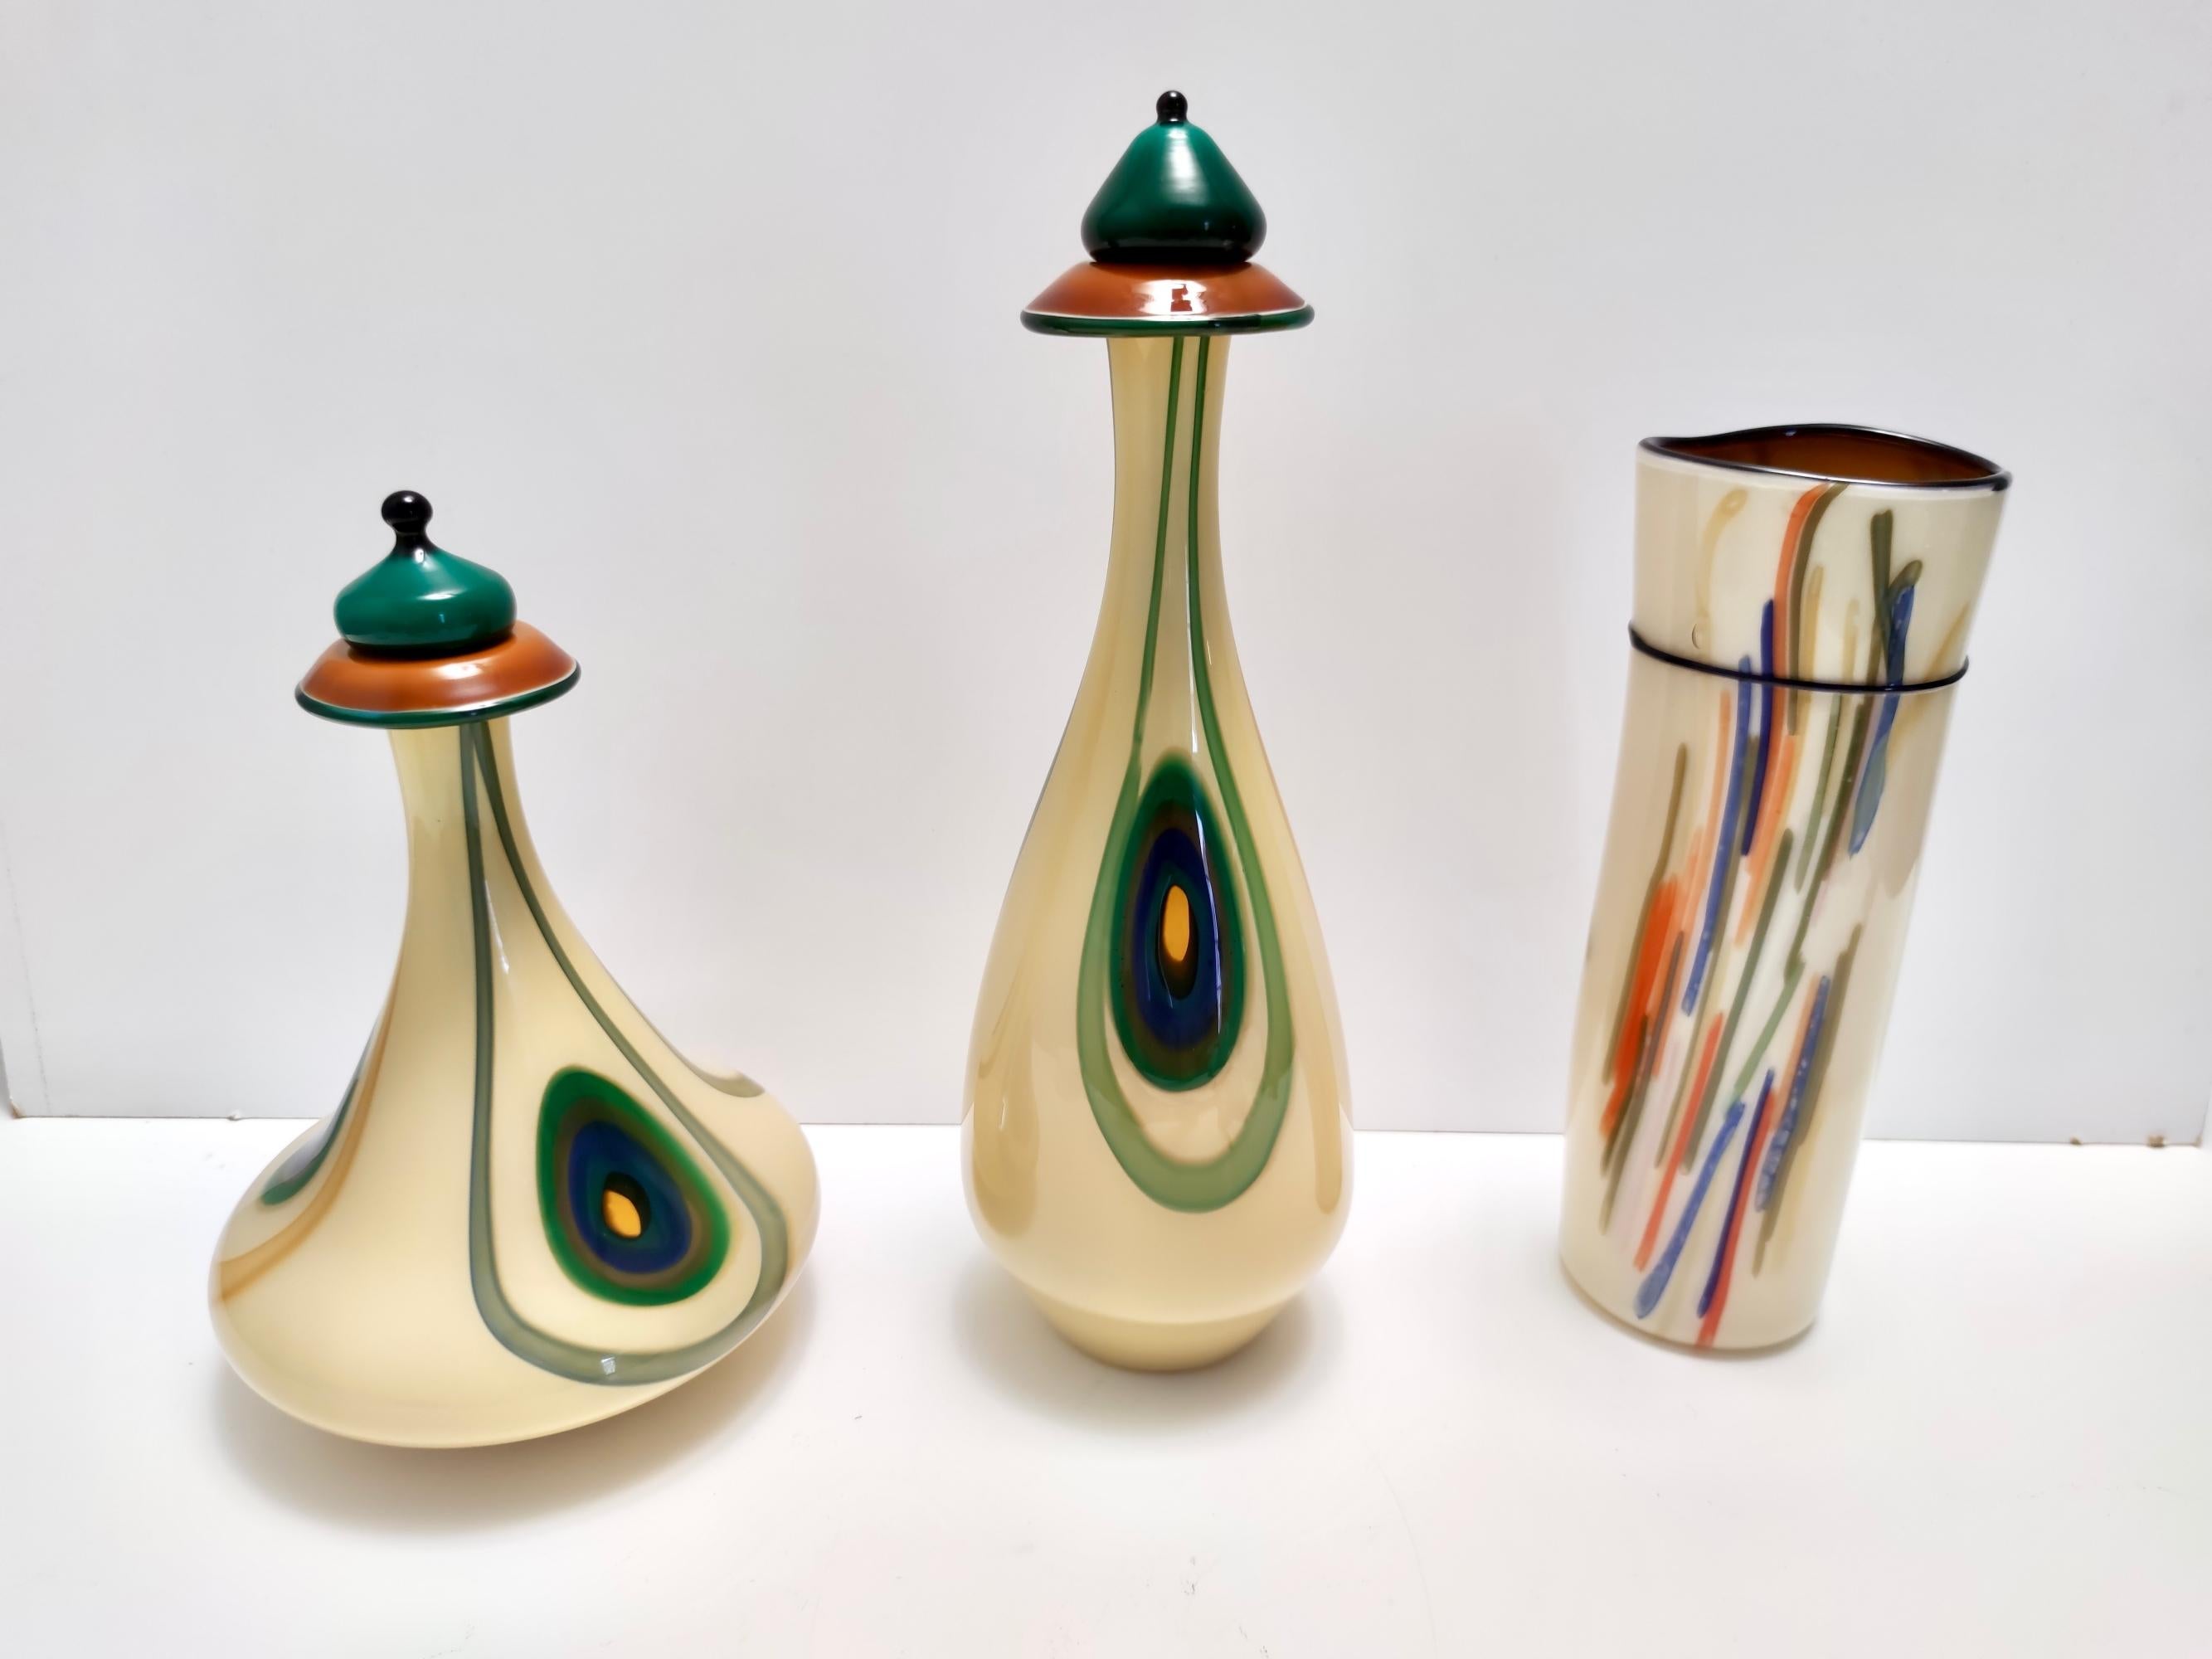 Made in Italy, 1960s - 1970s.
This vase is part of a three-piece set. 
It is made in encased opaline and hand-blown glass with colored canes.  
This is a vintage item, therefore it might show slight traces of use, but it can be considered as in